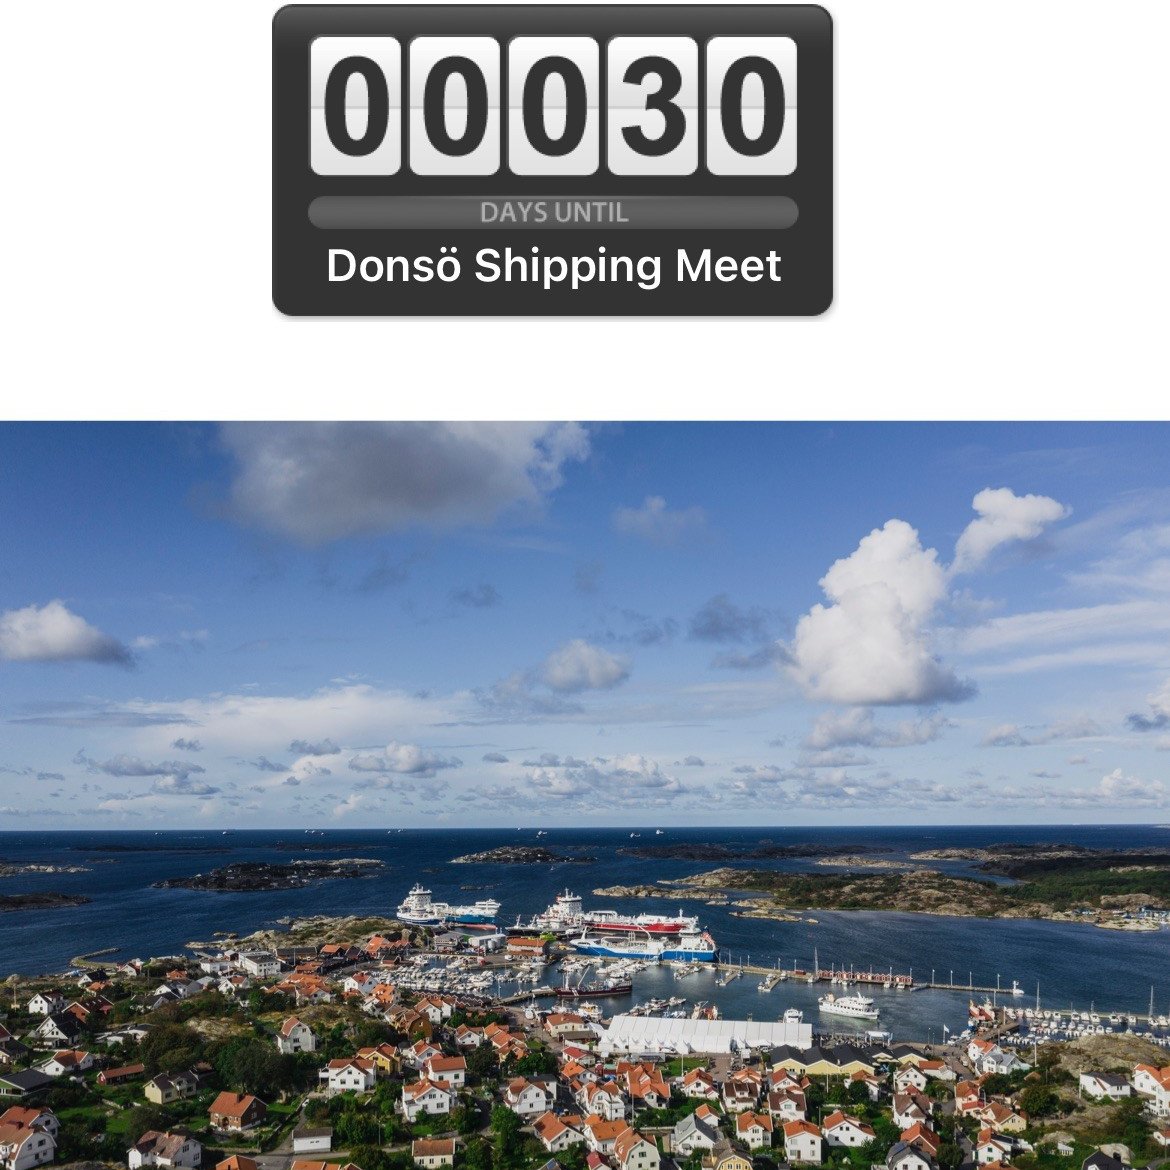 30 days until we meet on the island of Donsö! Don’t forget to sign up! DSM2022 - Clean Ocean with future in Sight, June 14-15 #sjöfart #shipping #donsöshippingmeet #donsoshippingmeet https://t.co/pA4NiF2oRY